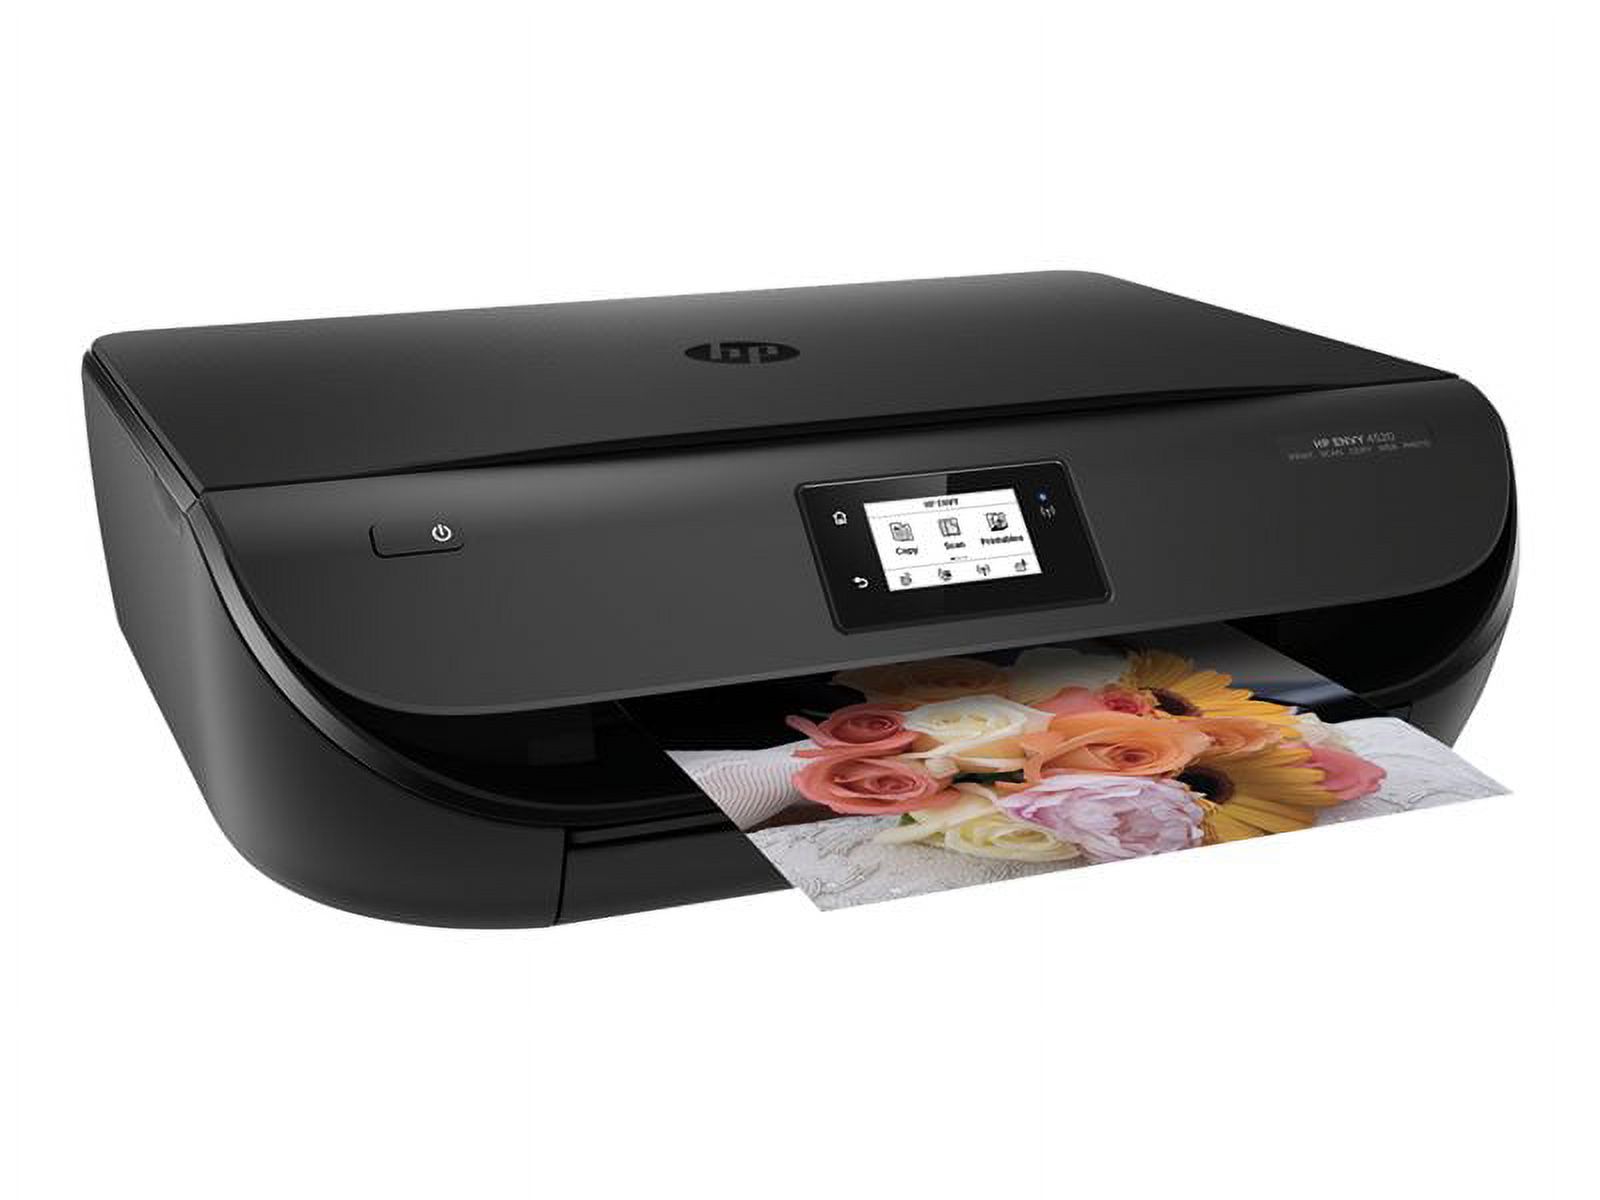 HP Envy 4520 All-in-One - multifunction printer (color) - image 1 of 33